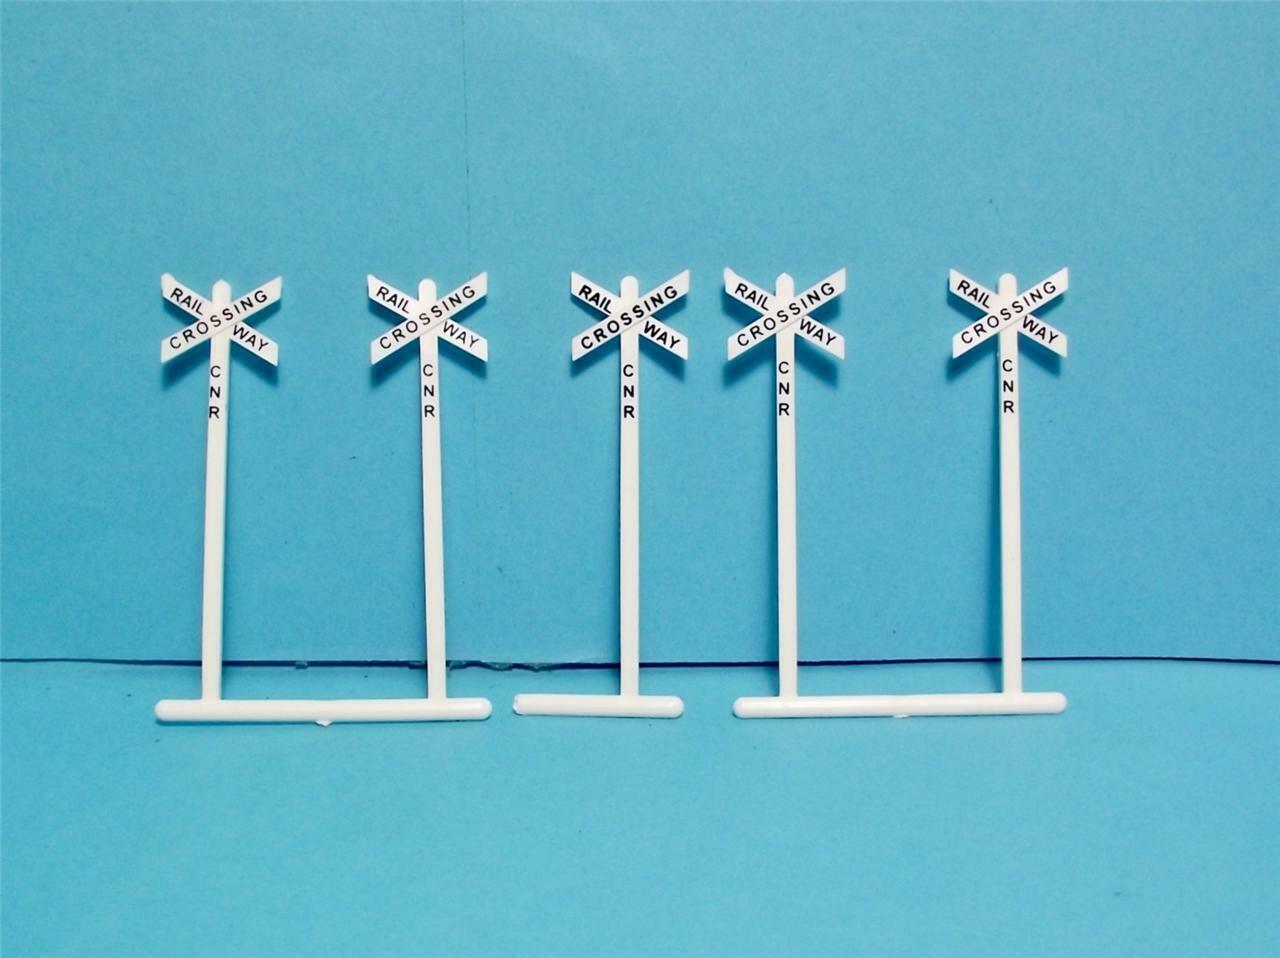 HO Scale Canadian Railroad Crossing Sign Tichy Train Group Accessories 5 Pcs 2HO